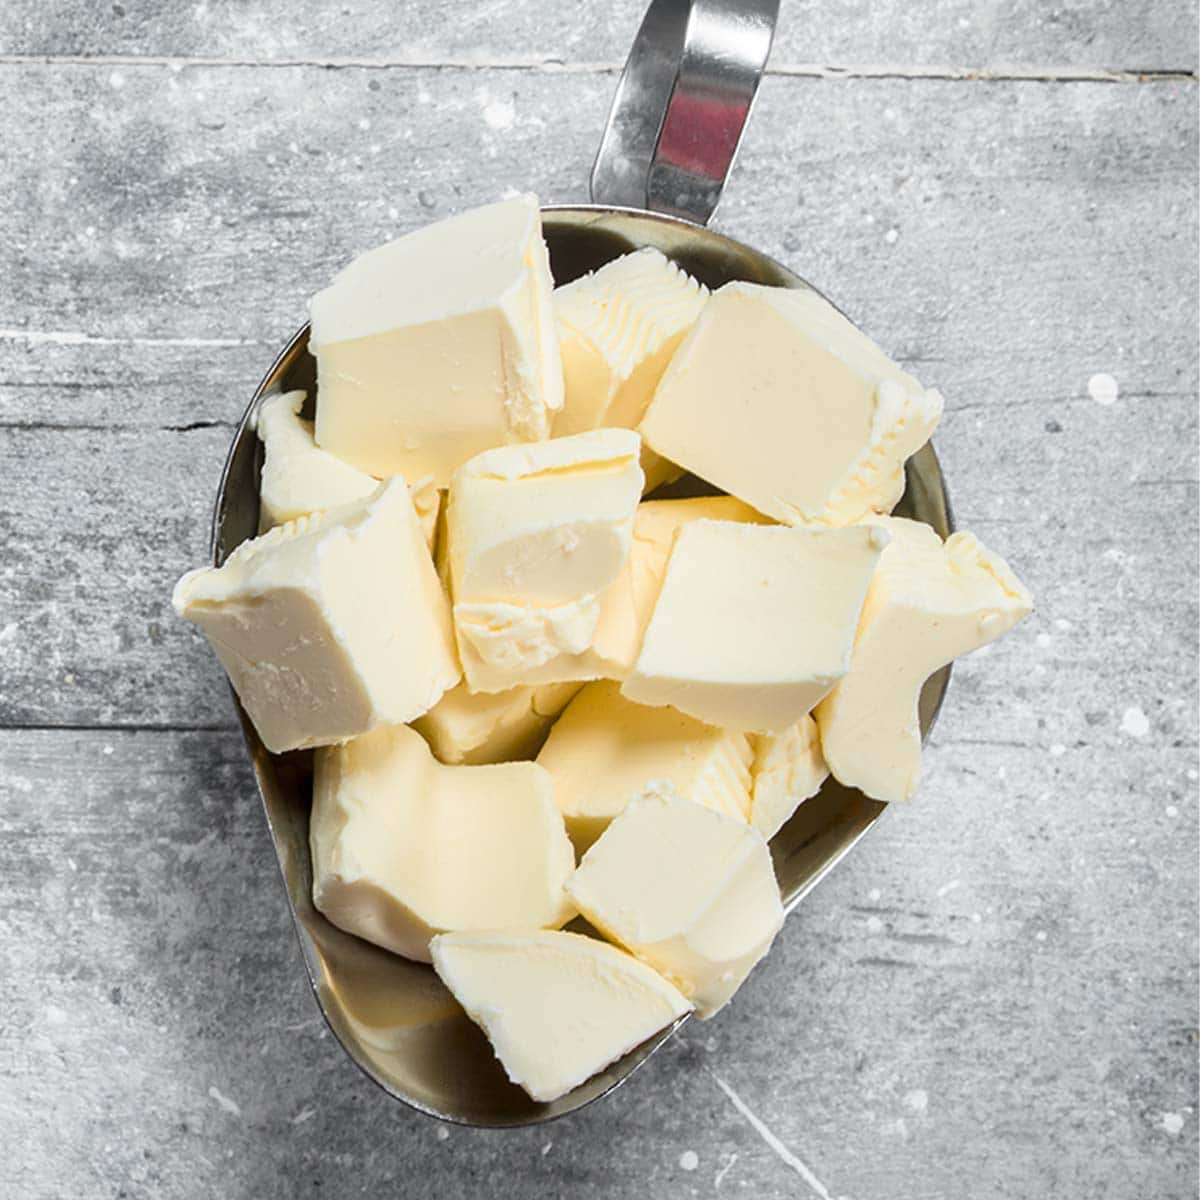 Because butter is a soft product, once mold appears on the outer surfaces, it can easily penetrate deeply and quickly, distributing toxins throughout the butter.